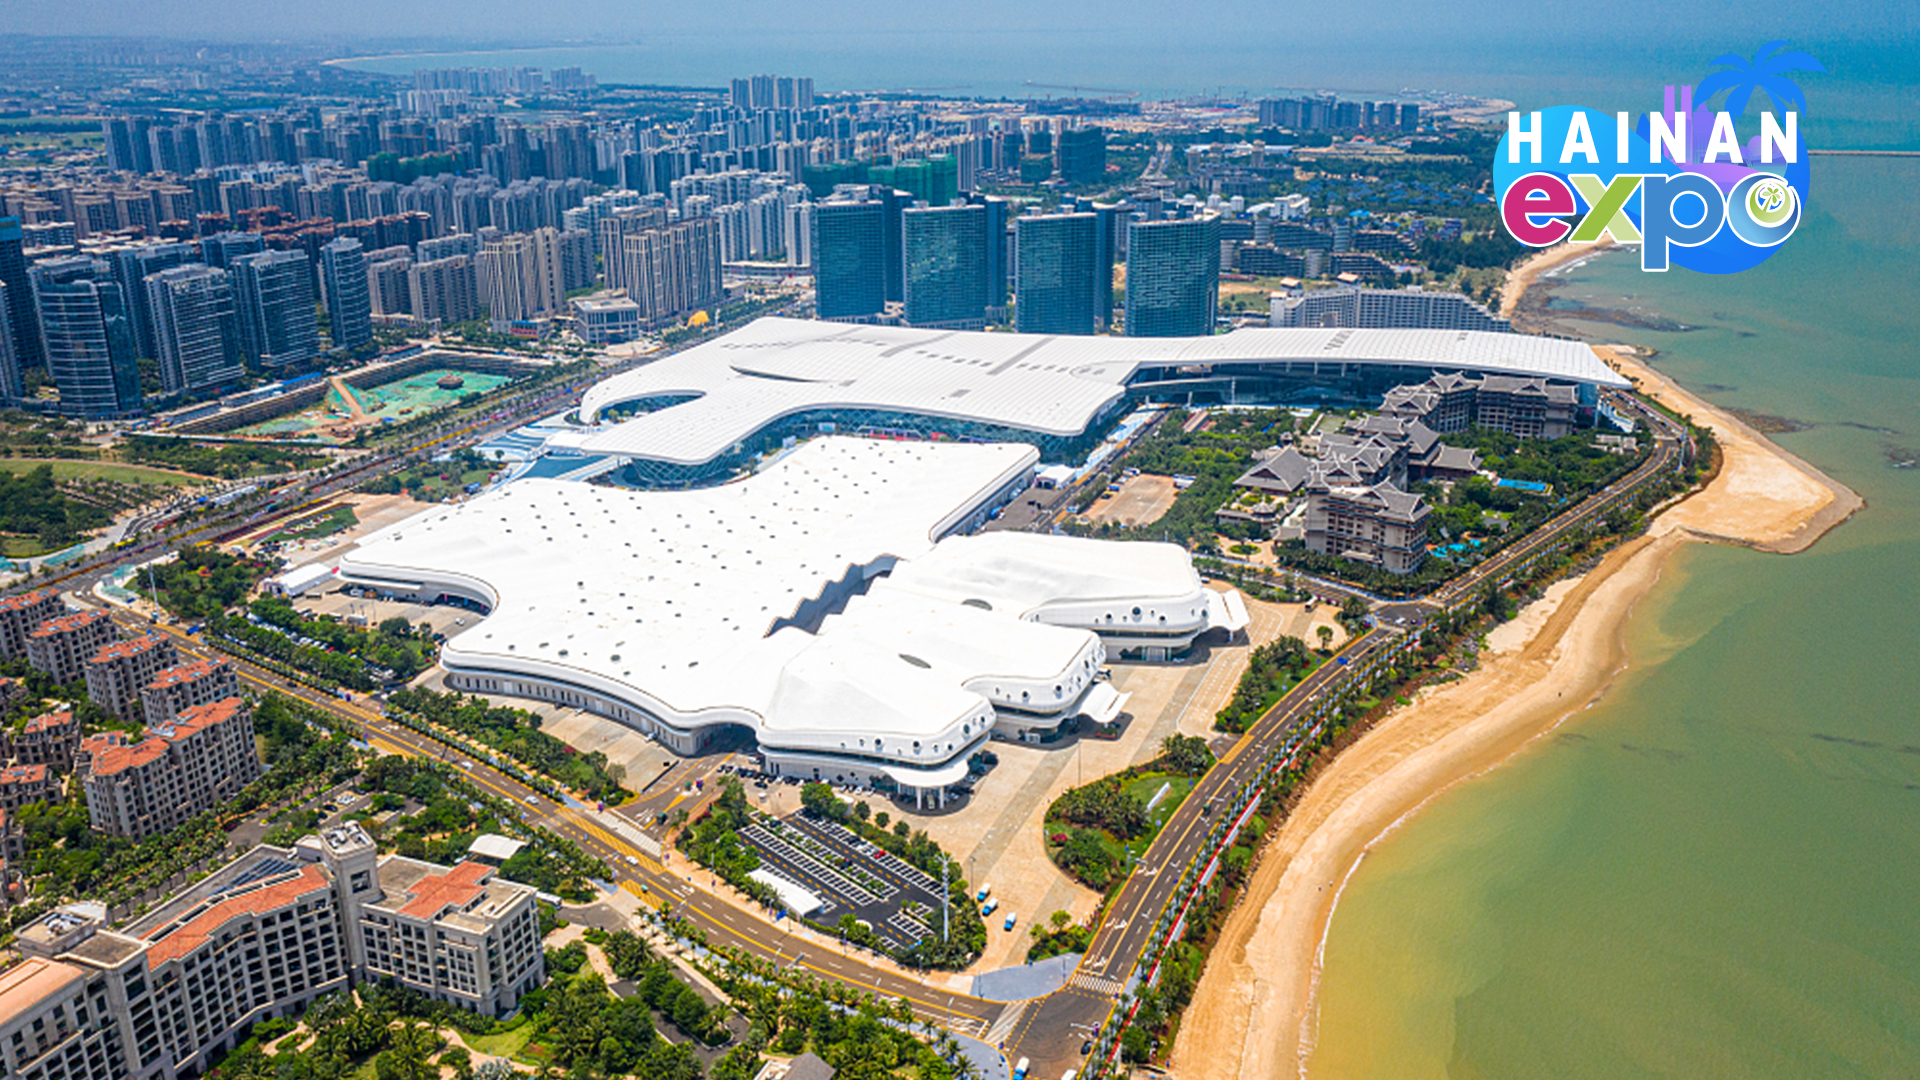 Live: Views of Hainan International Convention and Exhibition Center – Ep. 2